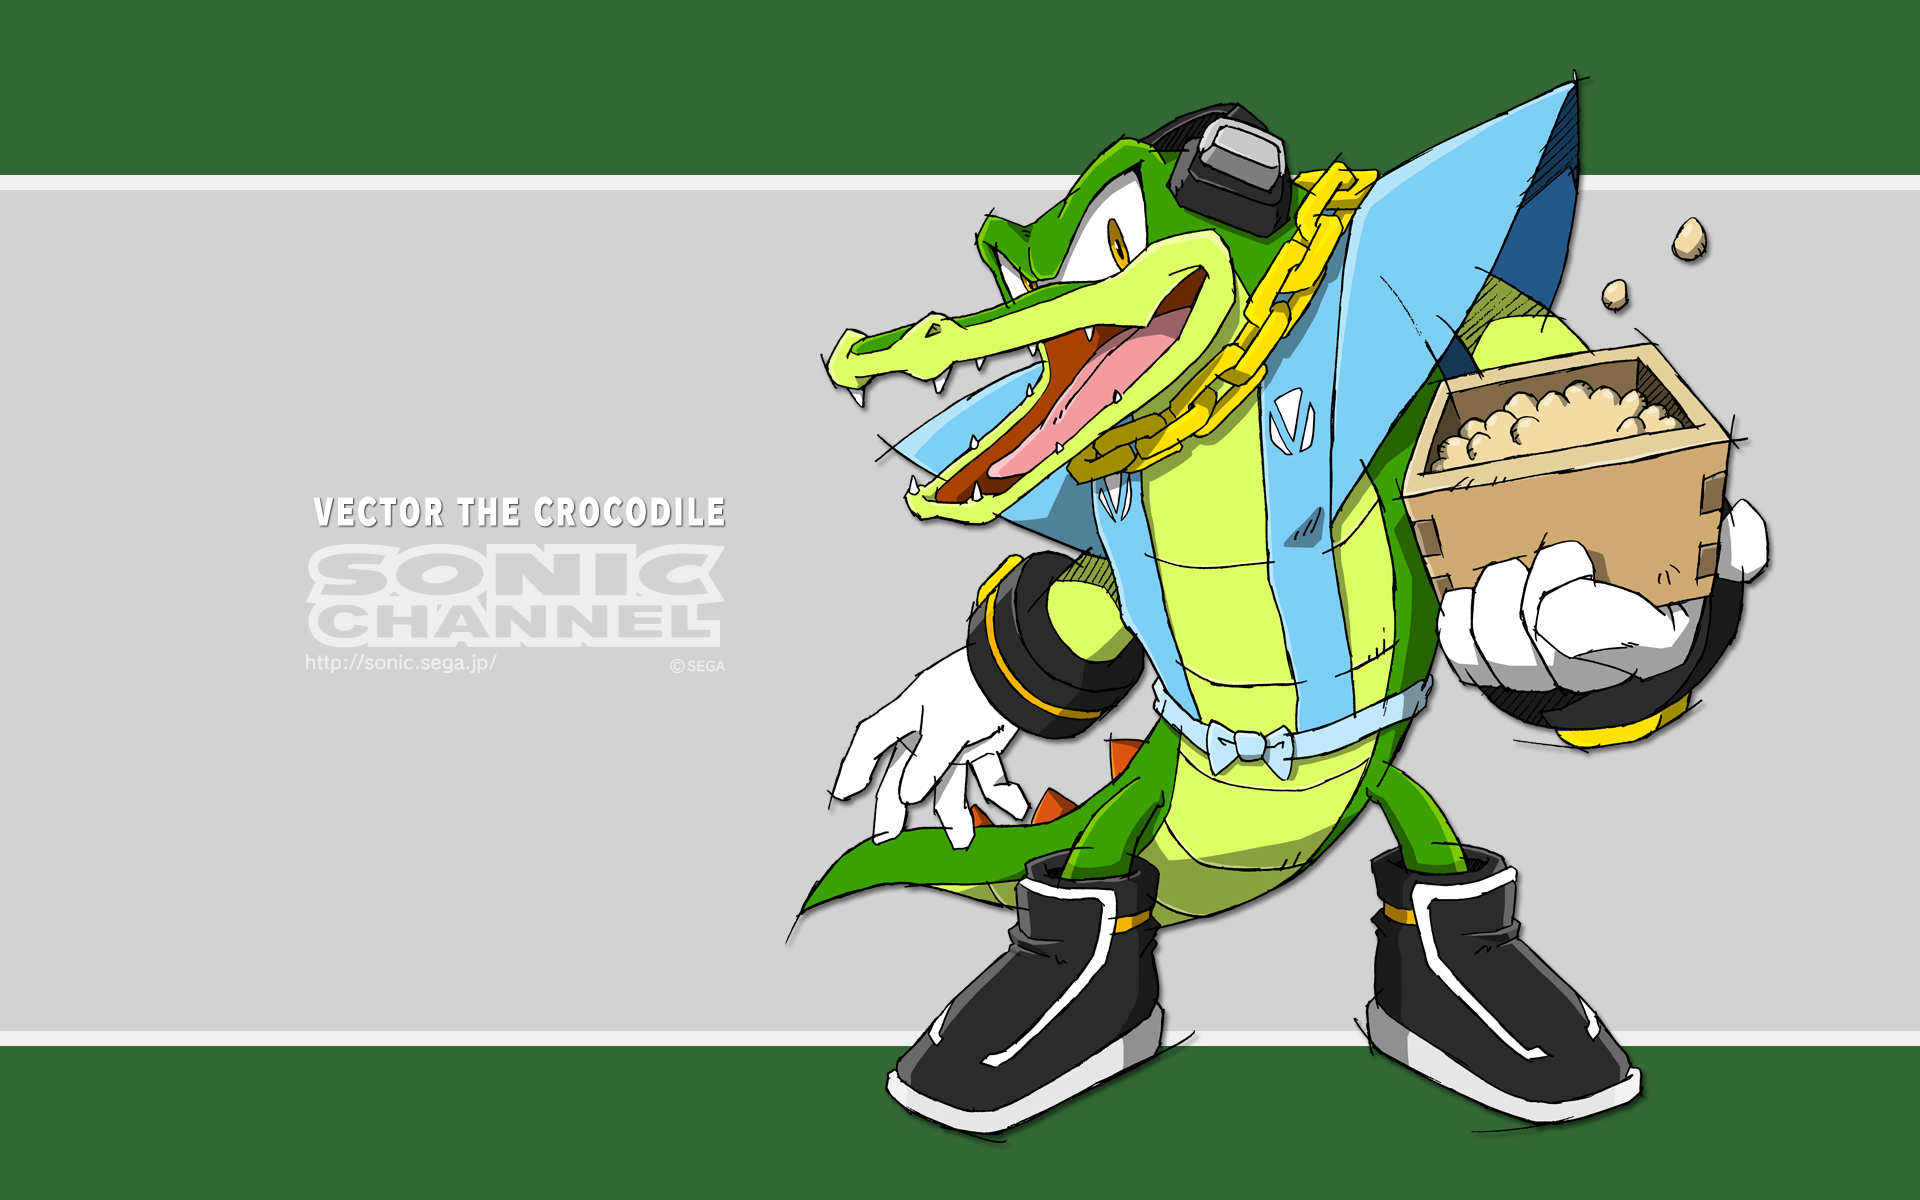 video game, sonic the hedgehog, sonic channel, vector the crocodile, sonic